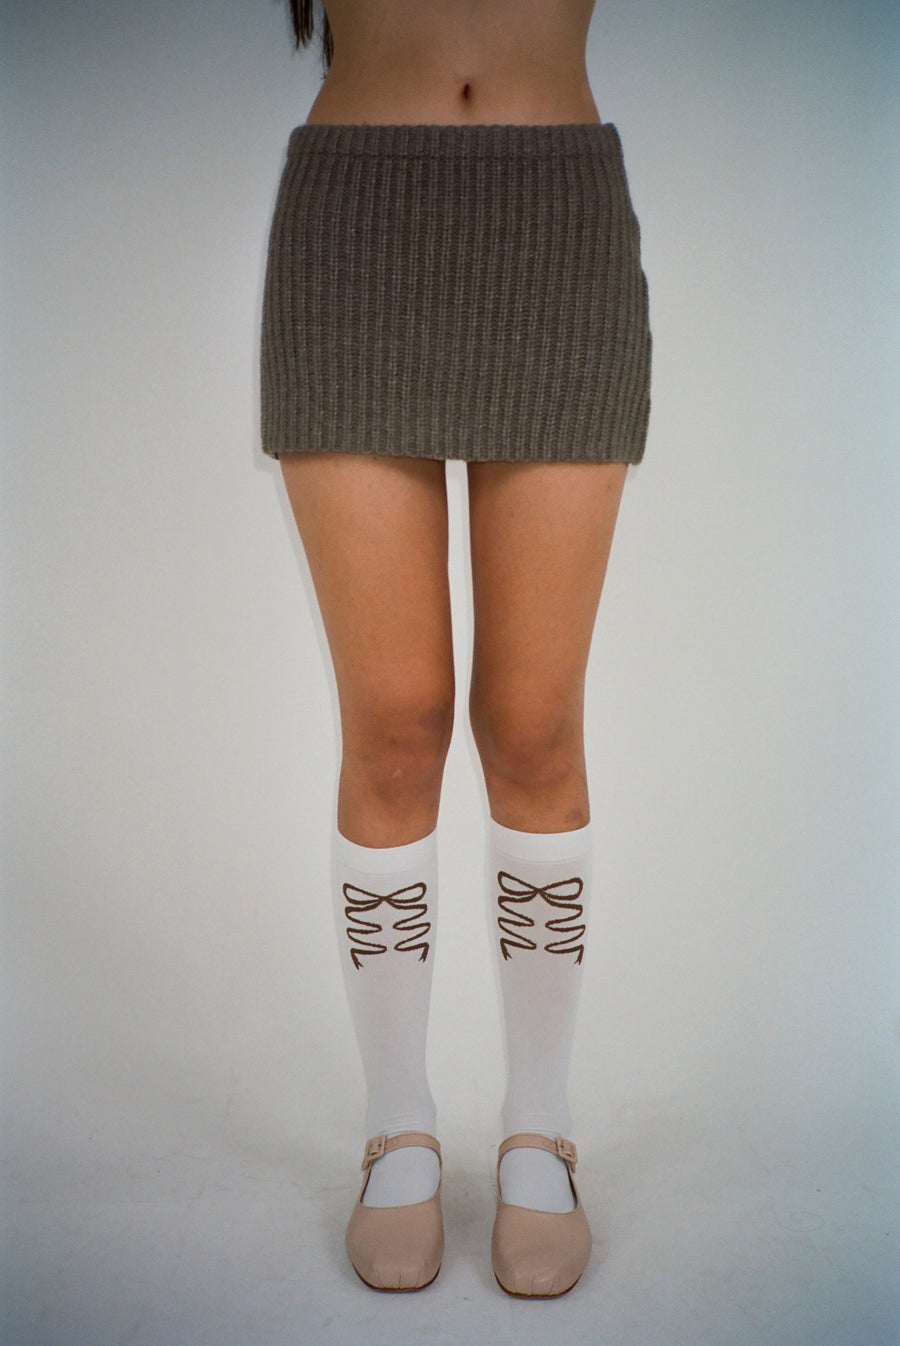 White knee high socks with brown bows on model